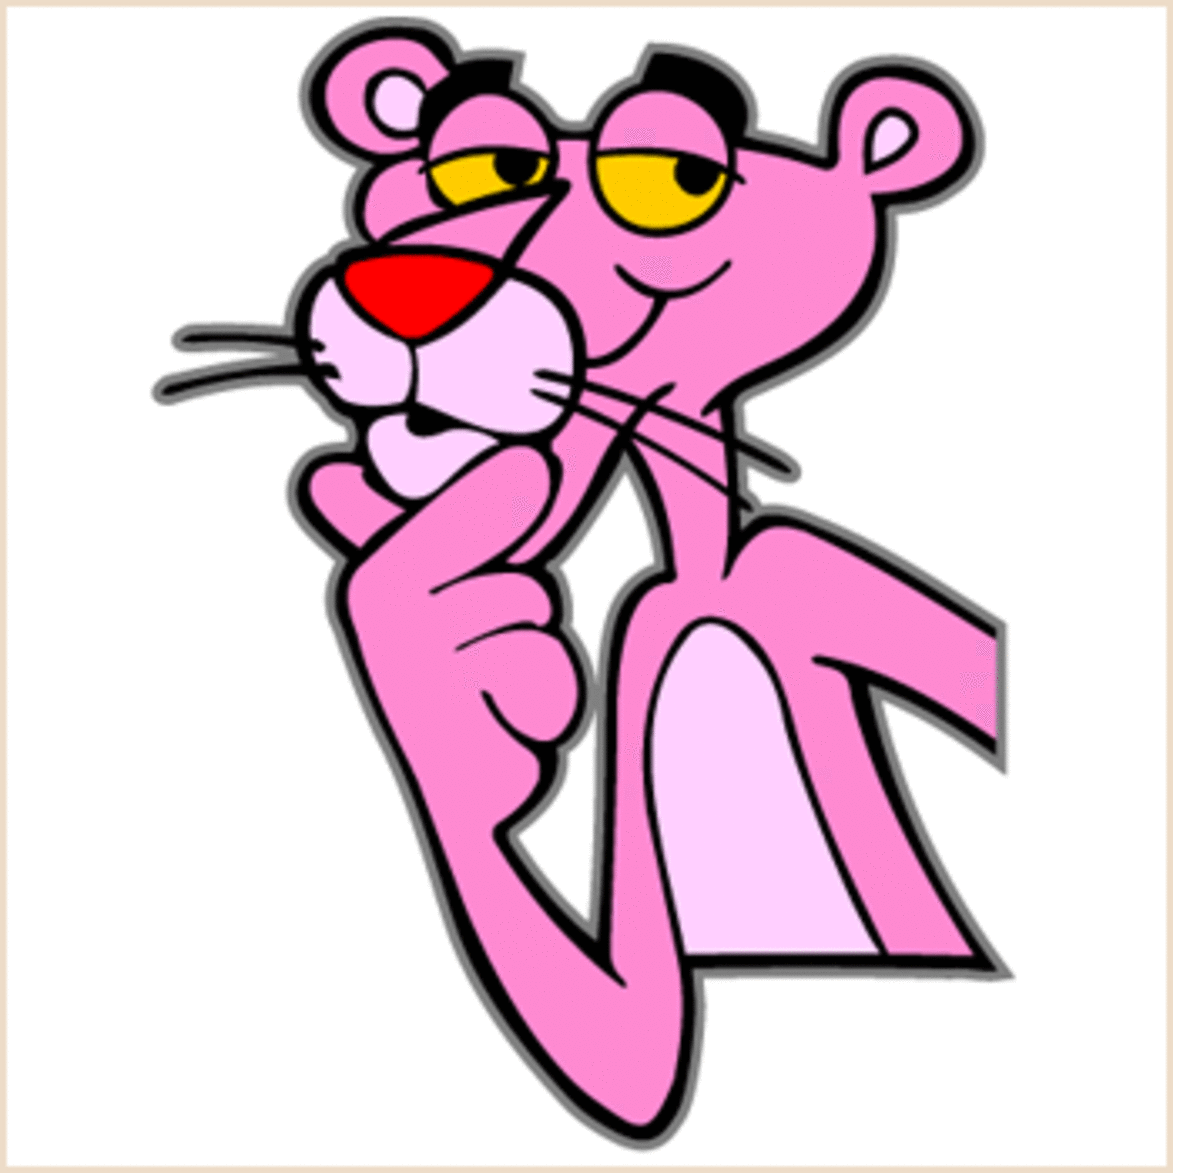 The Pink Panther!